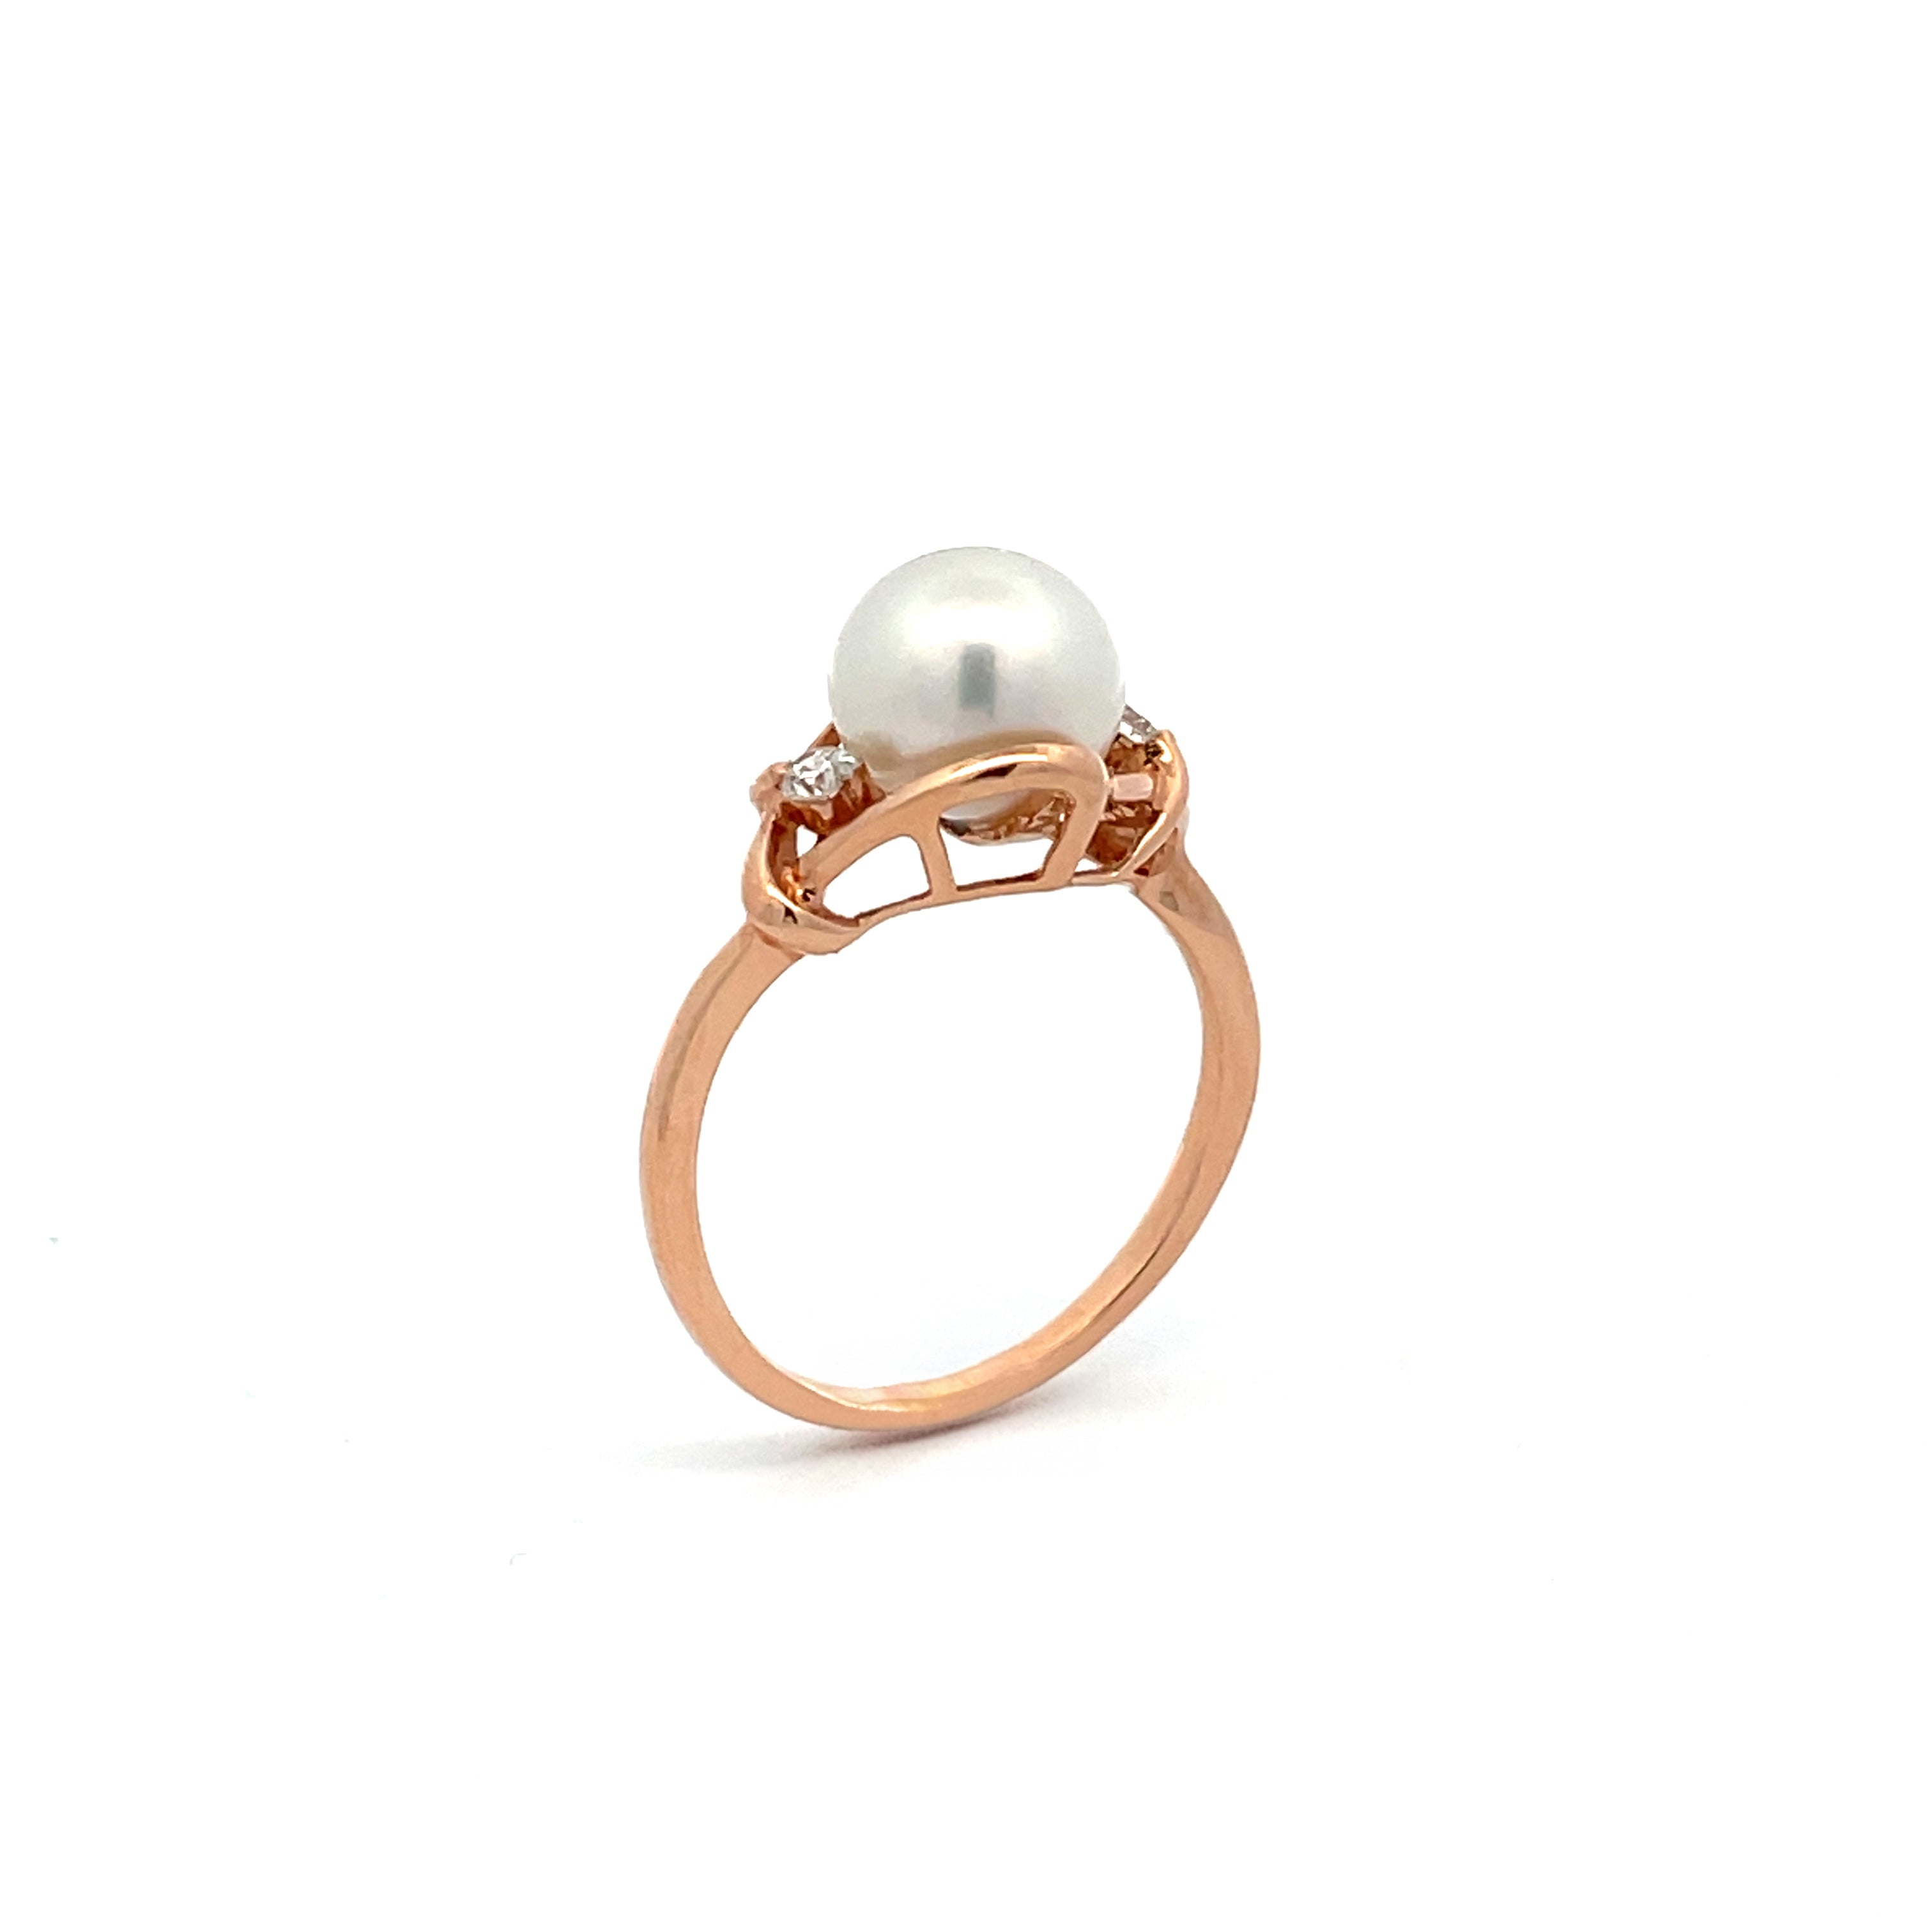 18K Rose Gold Australian South Sea Cultured 8-9 mm Pearl and Diamond Ring